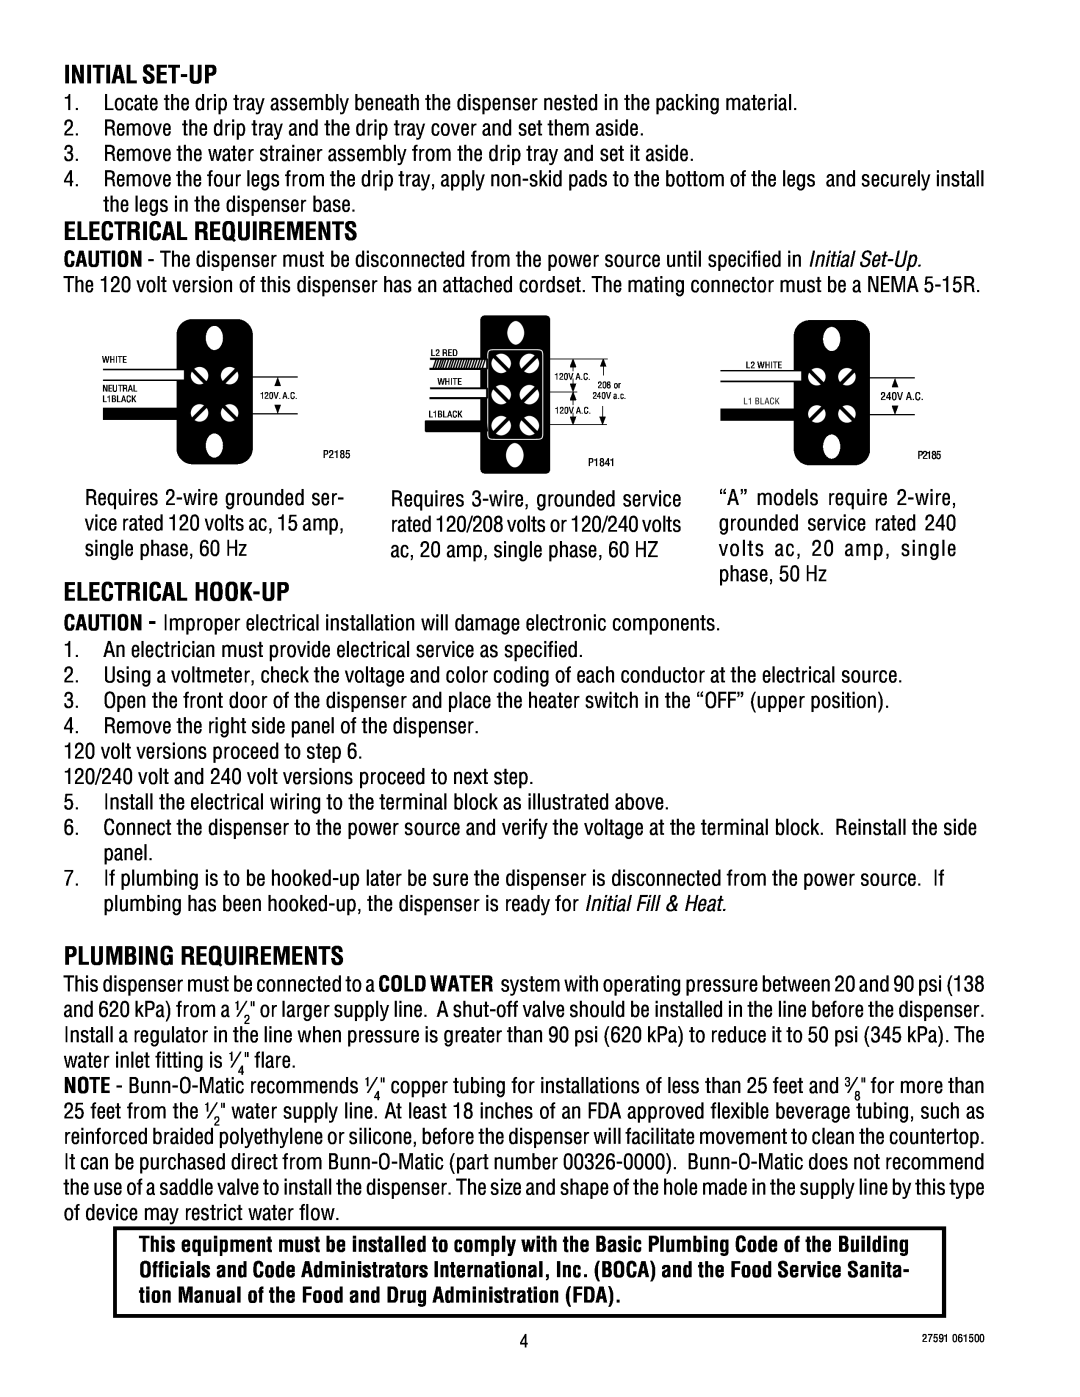 Bunn HC-3 service manual Initial Set-Up, Electrical Requirements, Electrical Hook-Up, Plumbing Requirements 